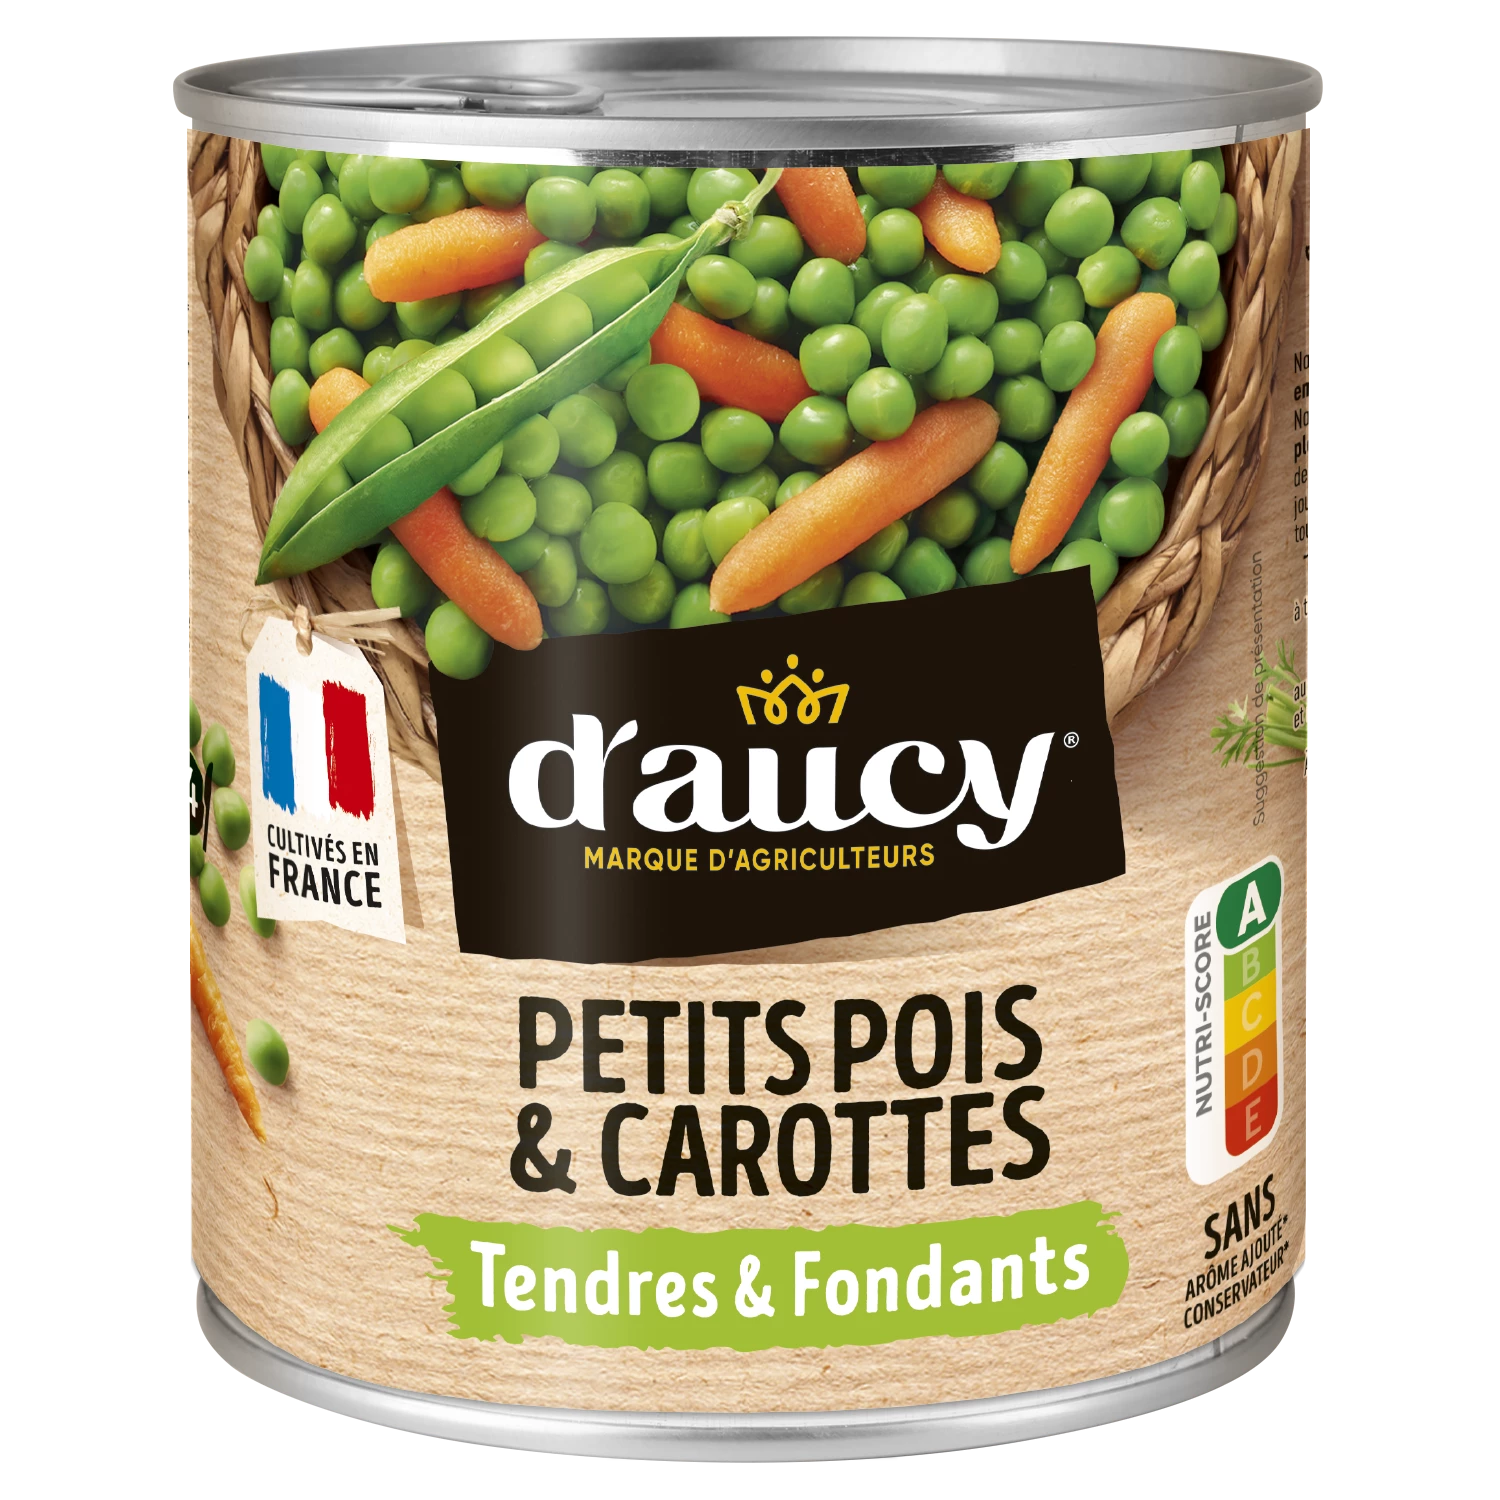 Petits Pois Carottes ExtraTendre; 530g -  D'AUCY